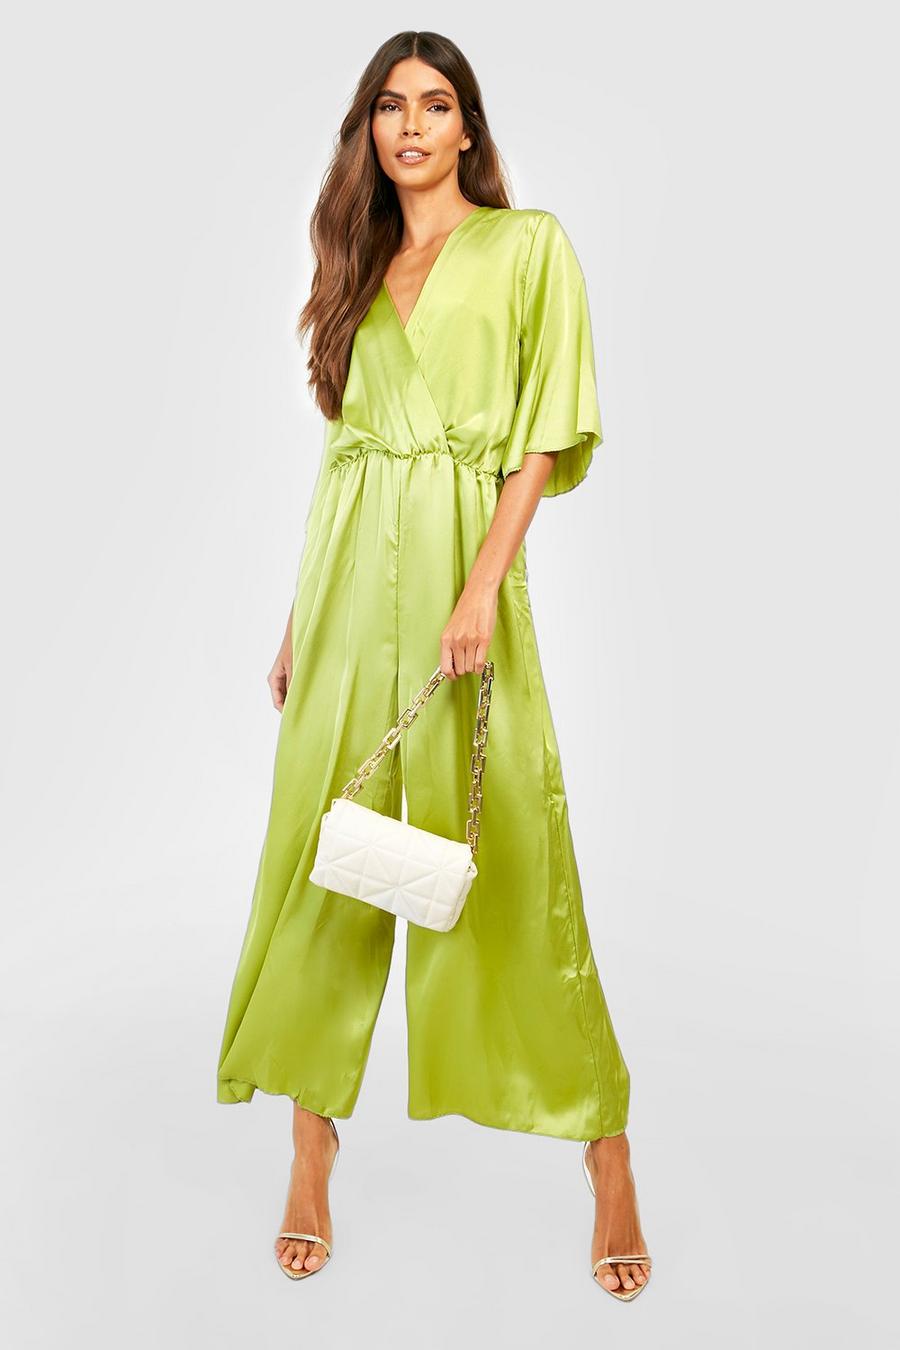 Chartreuse yellow Angel Sleeve Culotte Jumpsuit